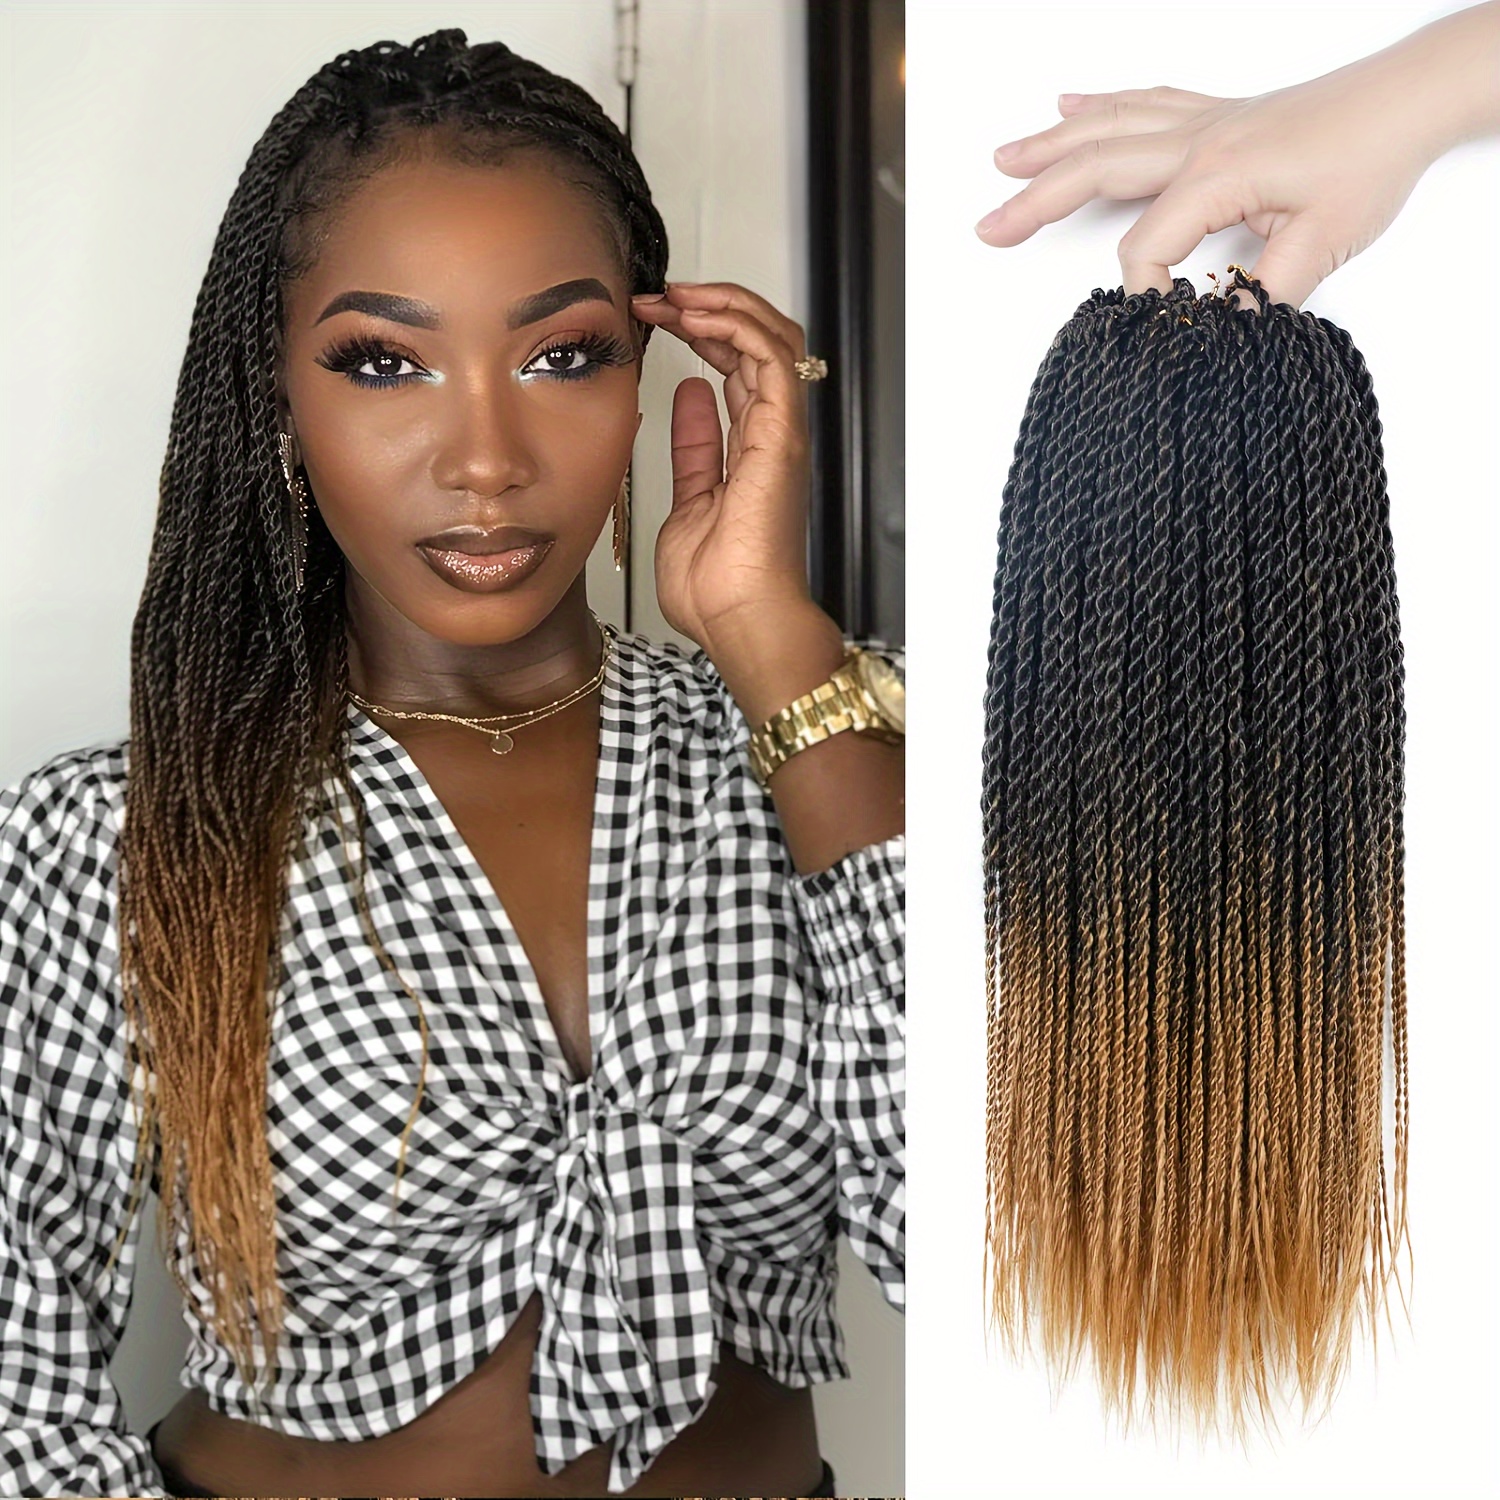 1 Pack Small Box Braids With Curly Ends 32 Inch Long Box Braids